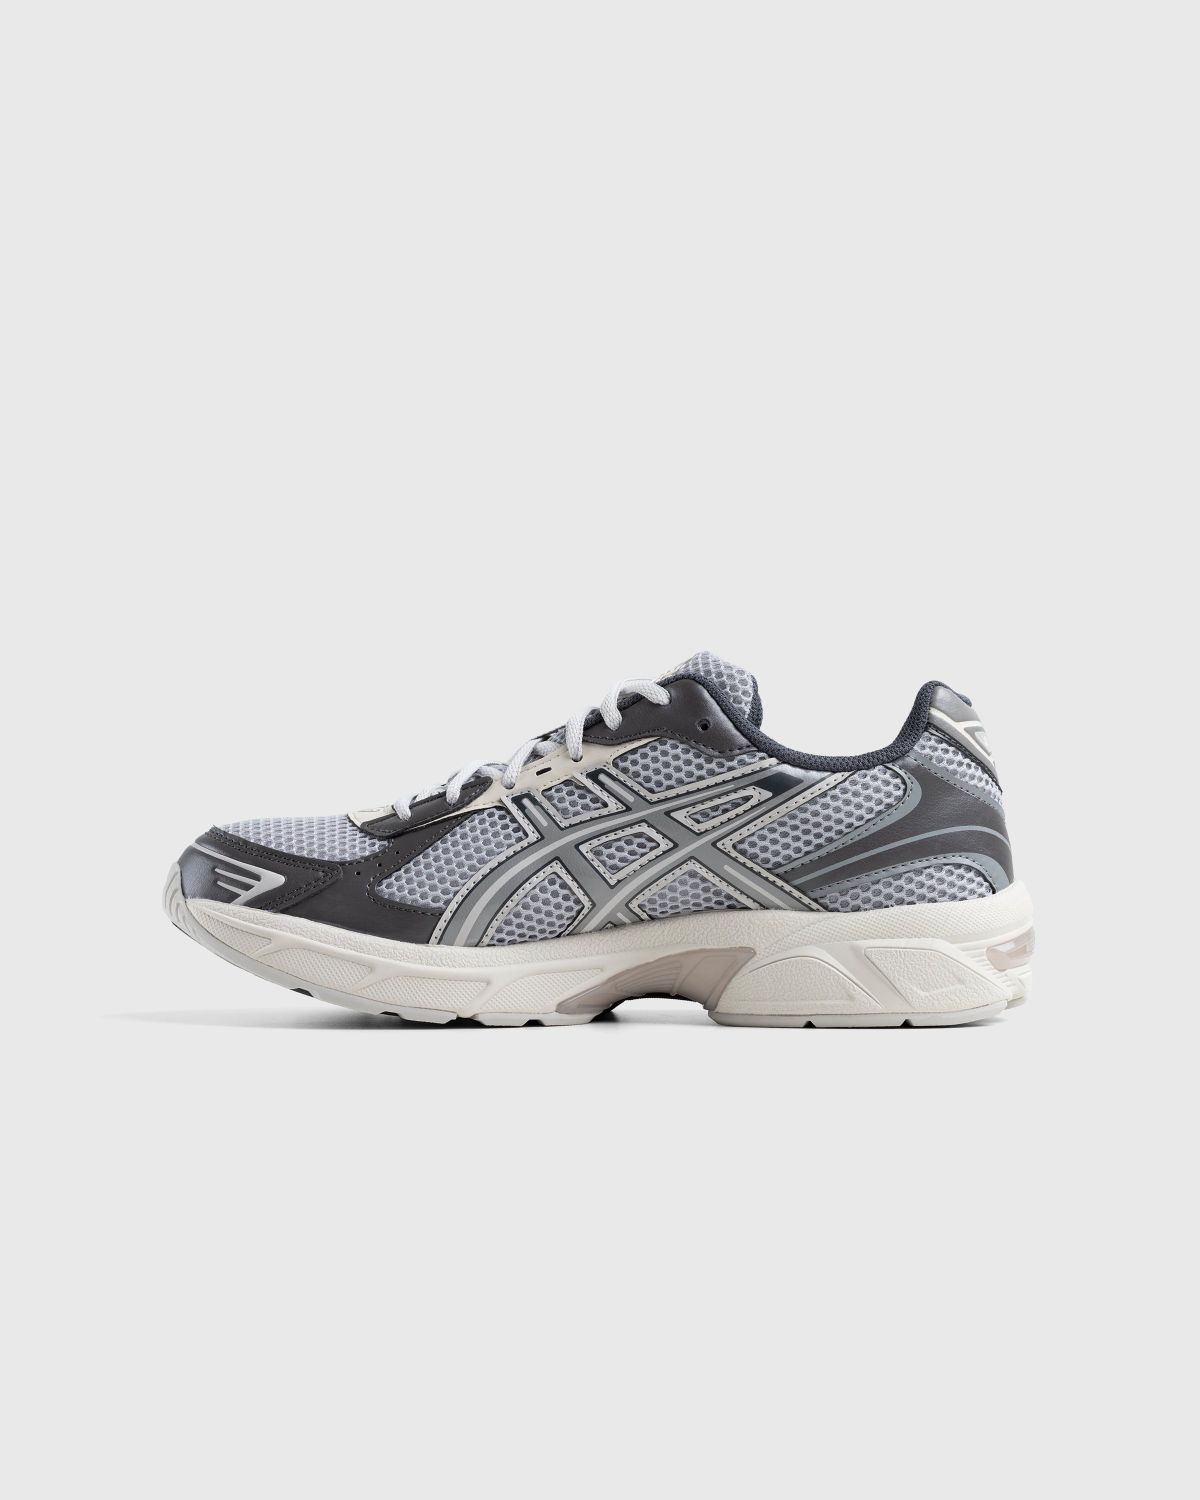 asics – Gel-1130 Oyster Grey/Clay Grey - Sneakers - Grey - Image 3